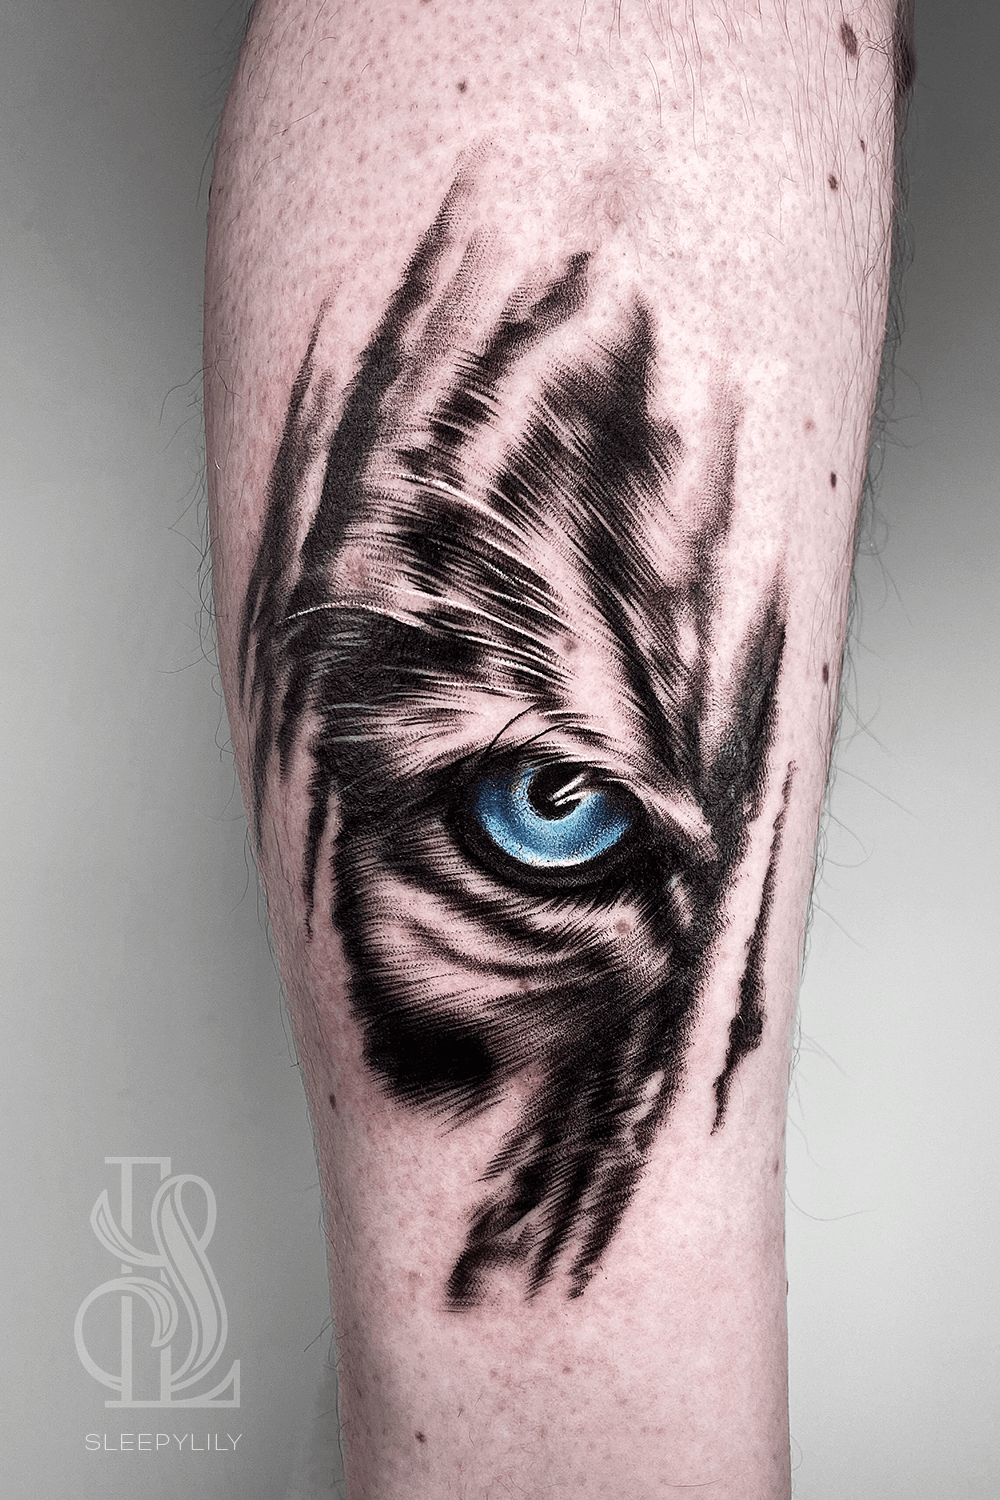 Tiger Tattoos for Men and Women Ideas and Temporary Tattoos  neartattoos